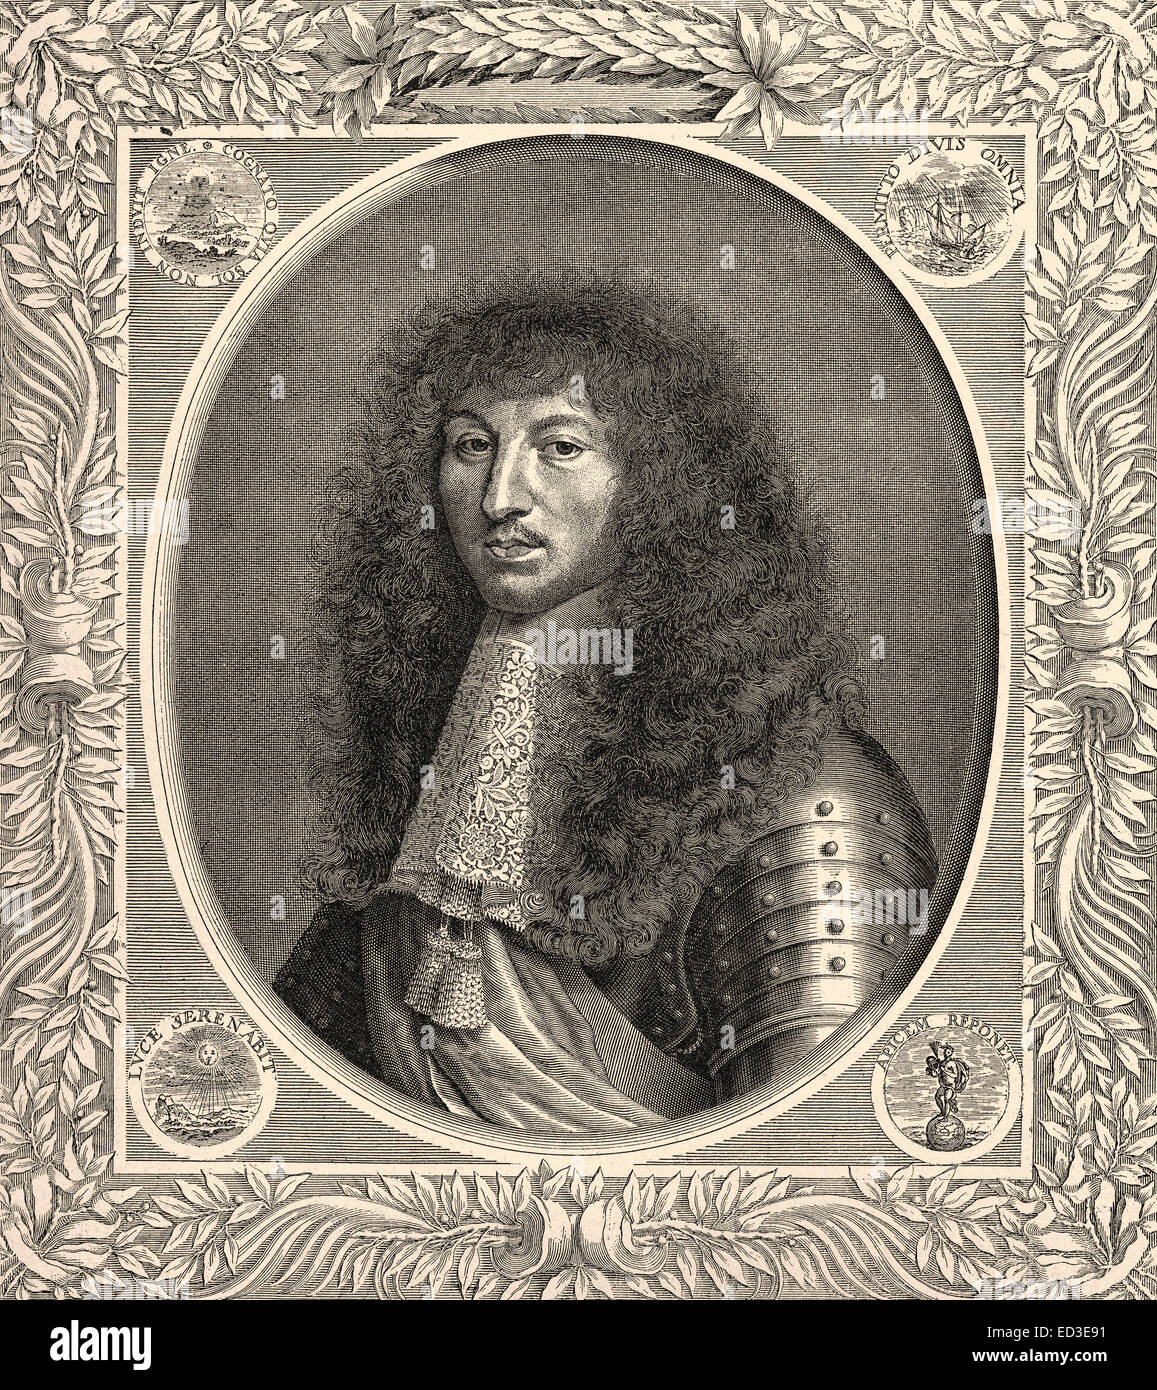 Portrait of Louis XIV, Louis le Grand, 1638 - 1715, King of France and Navarre, called the Sun King or le Roi-Soleil, Portrait v Stock Photo